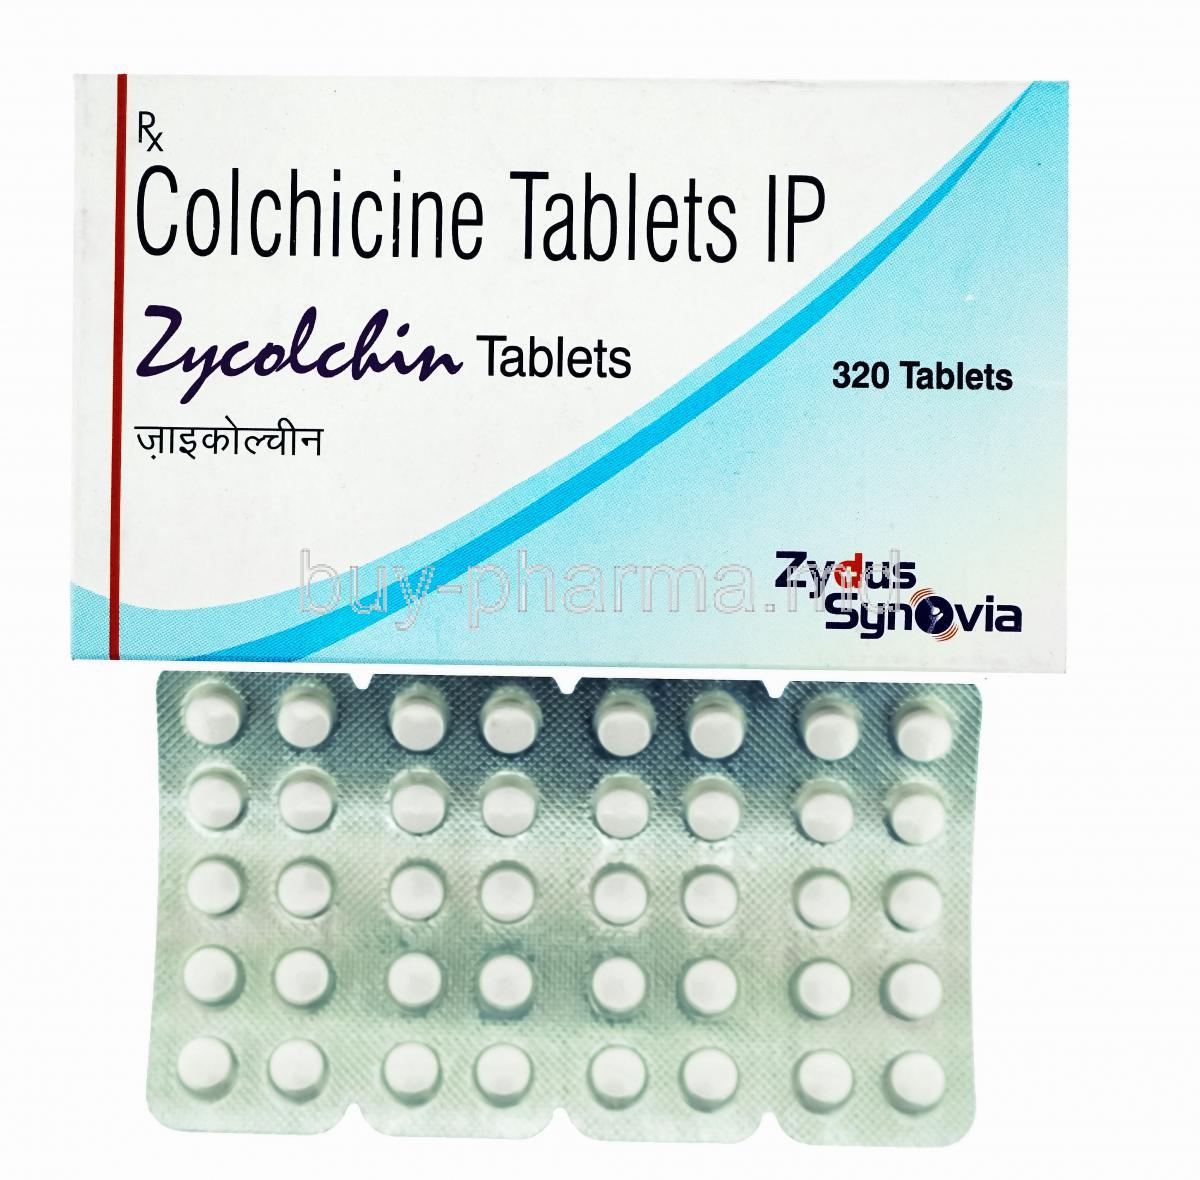 Generic Colcrys, Colchicine tablets IP, Zycolchin tablets, 320 tablets, Zydus Synovia, box front presentation with blister pack